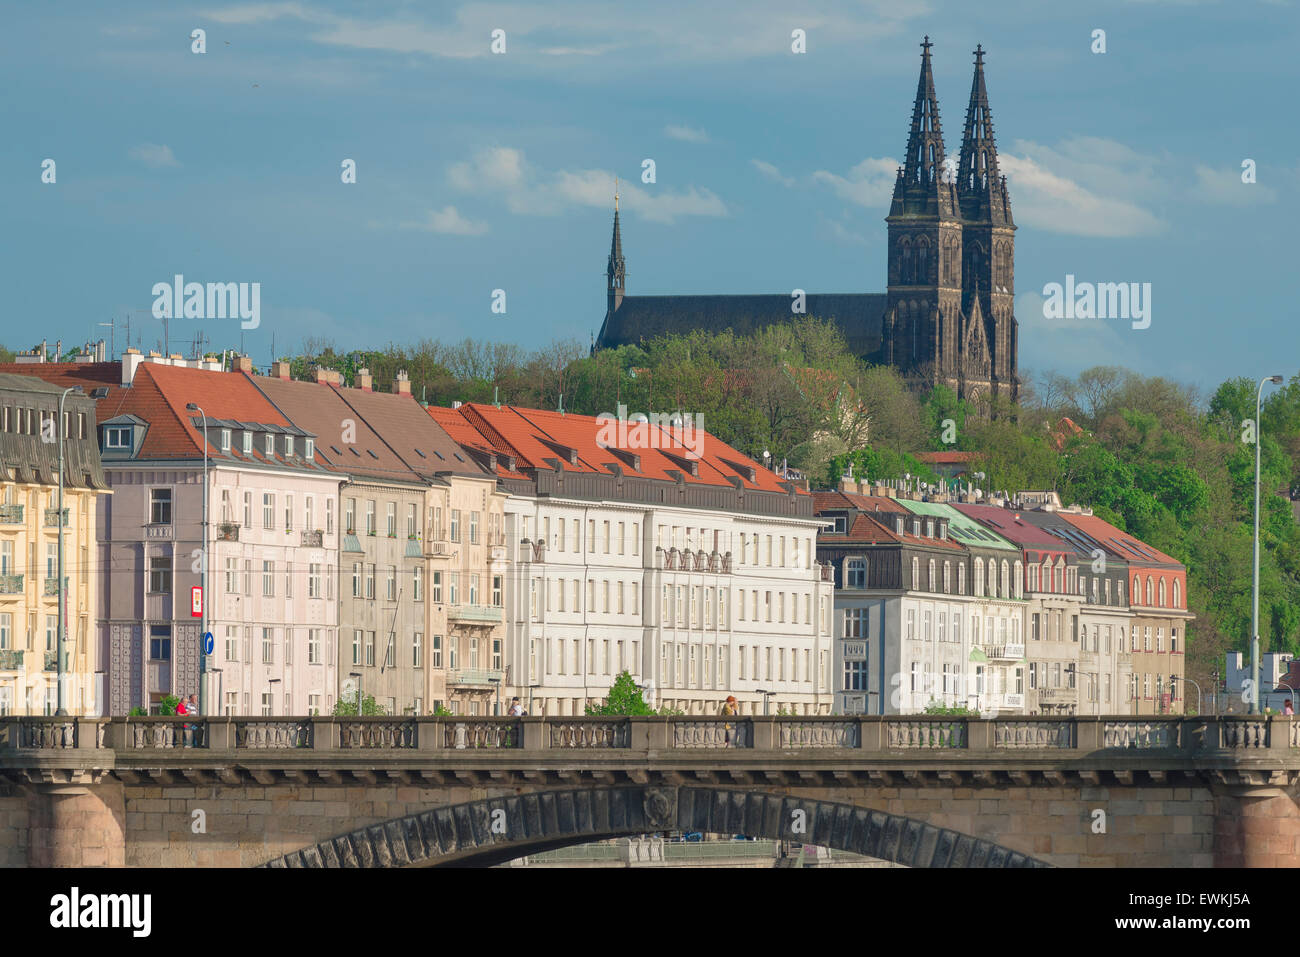 Prague riverside, view of pastel-coloured apartment buildings and the Petr and Pavel church beside the River Vltava,Nove Mesto, Prague. Stock Photo